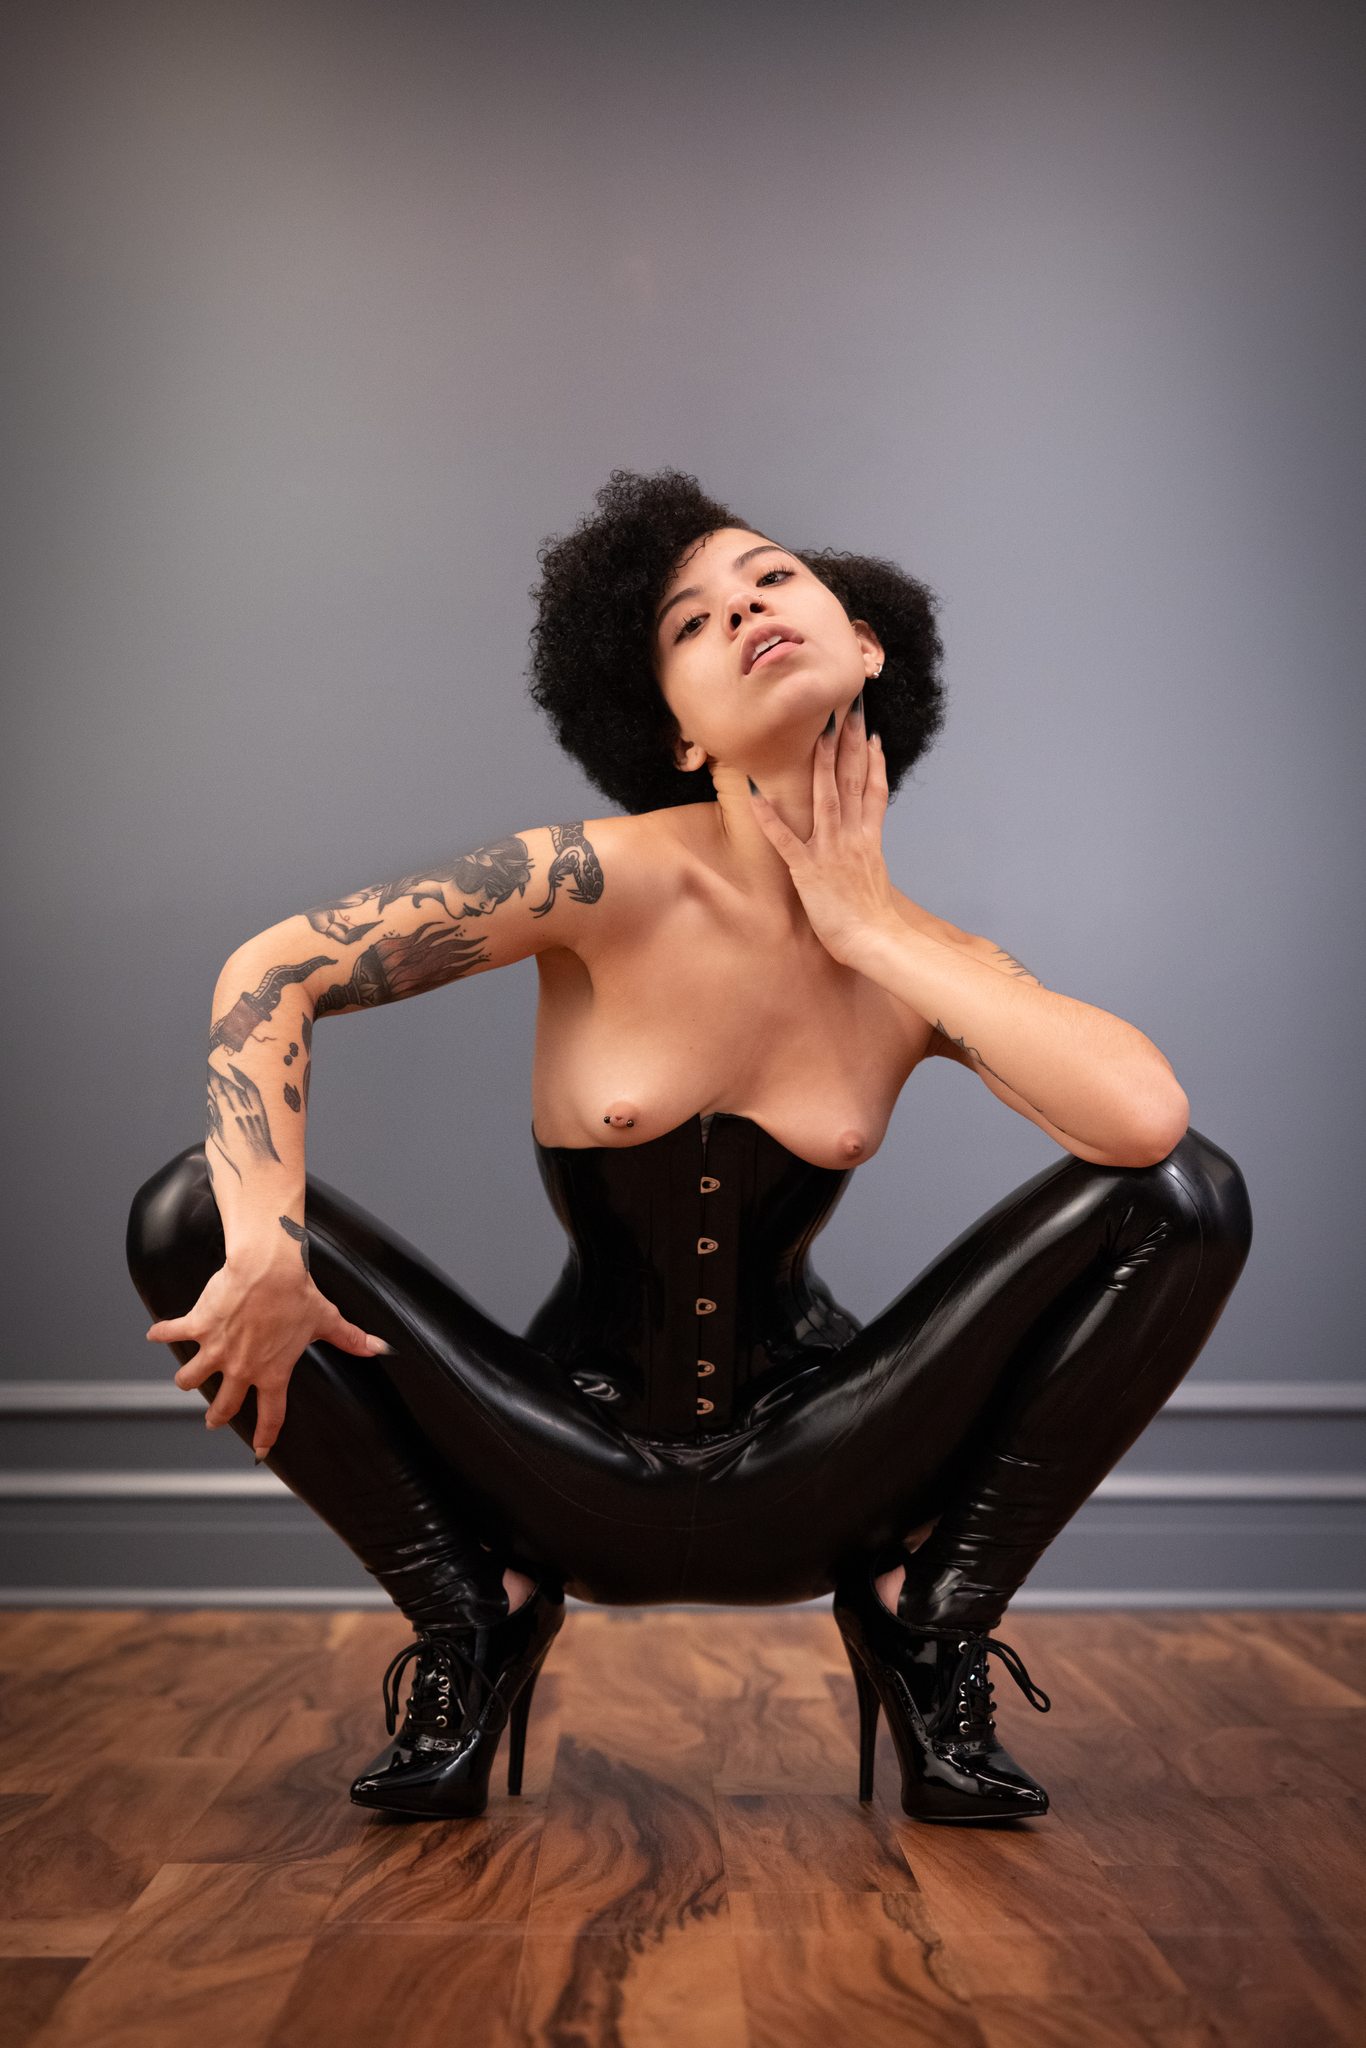 https://images.reflectivedesire.com/photos/shweetie/shweetie-in-black-latex-9.large.jpg